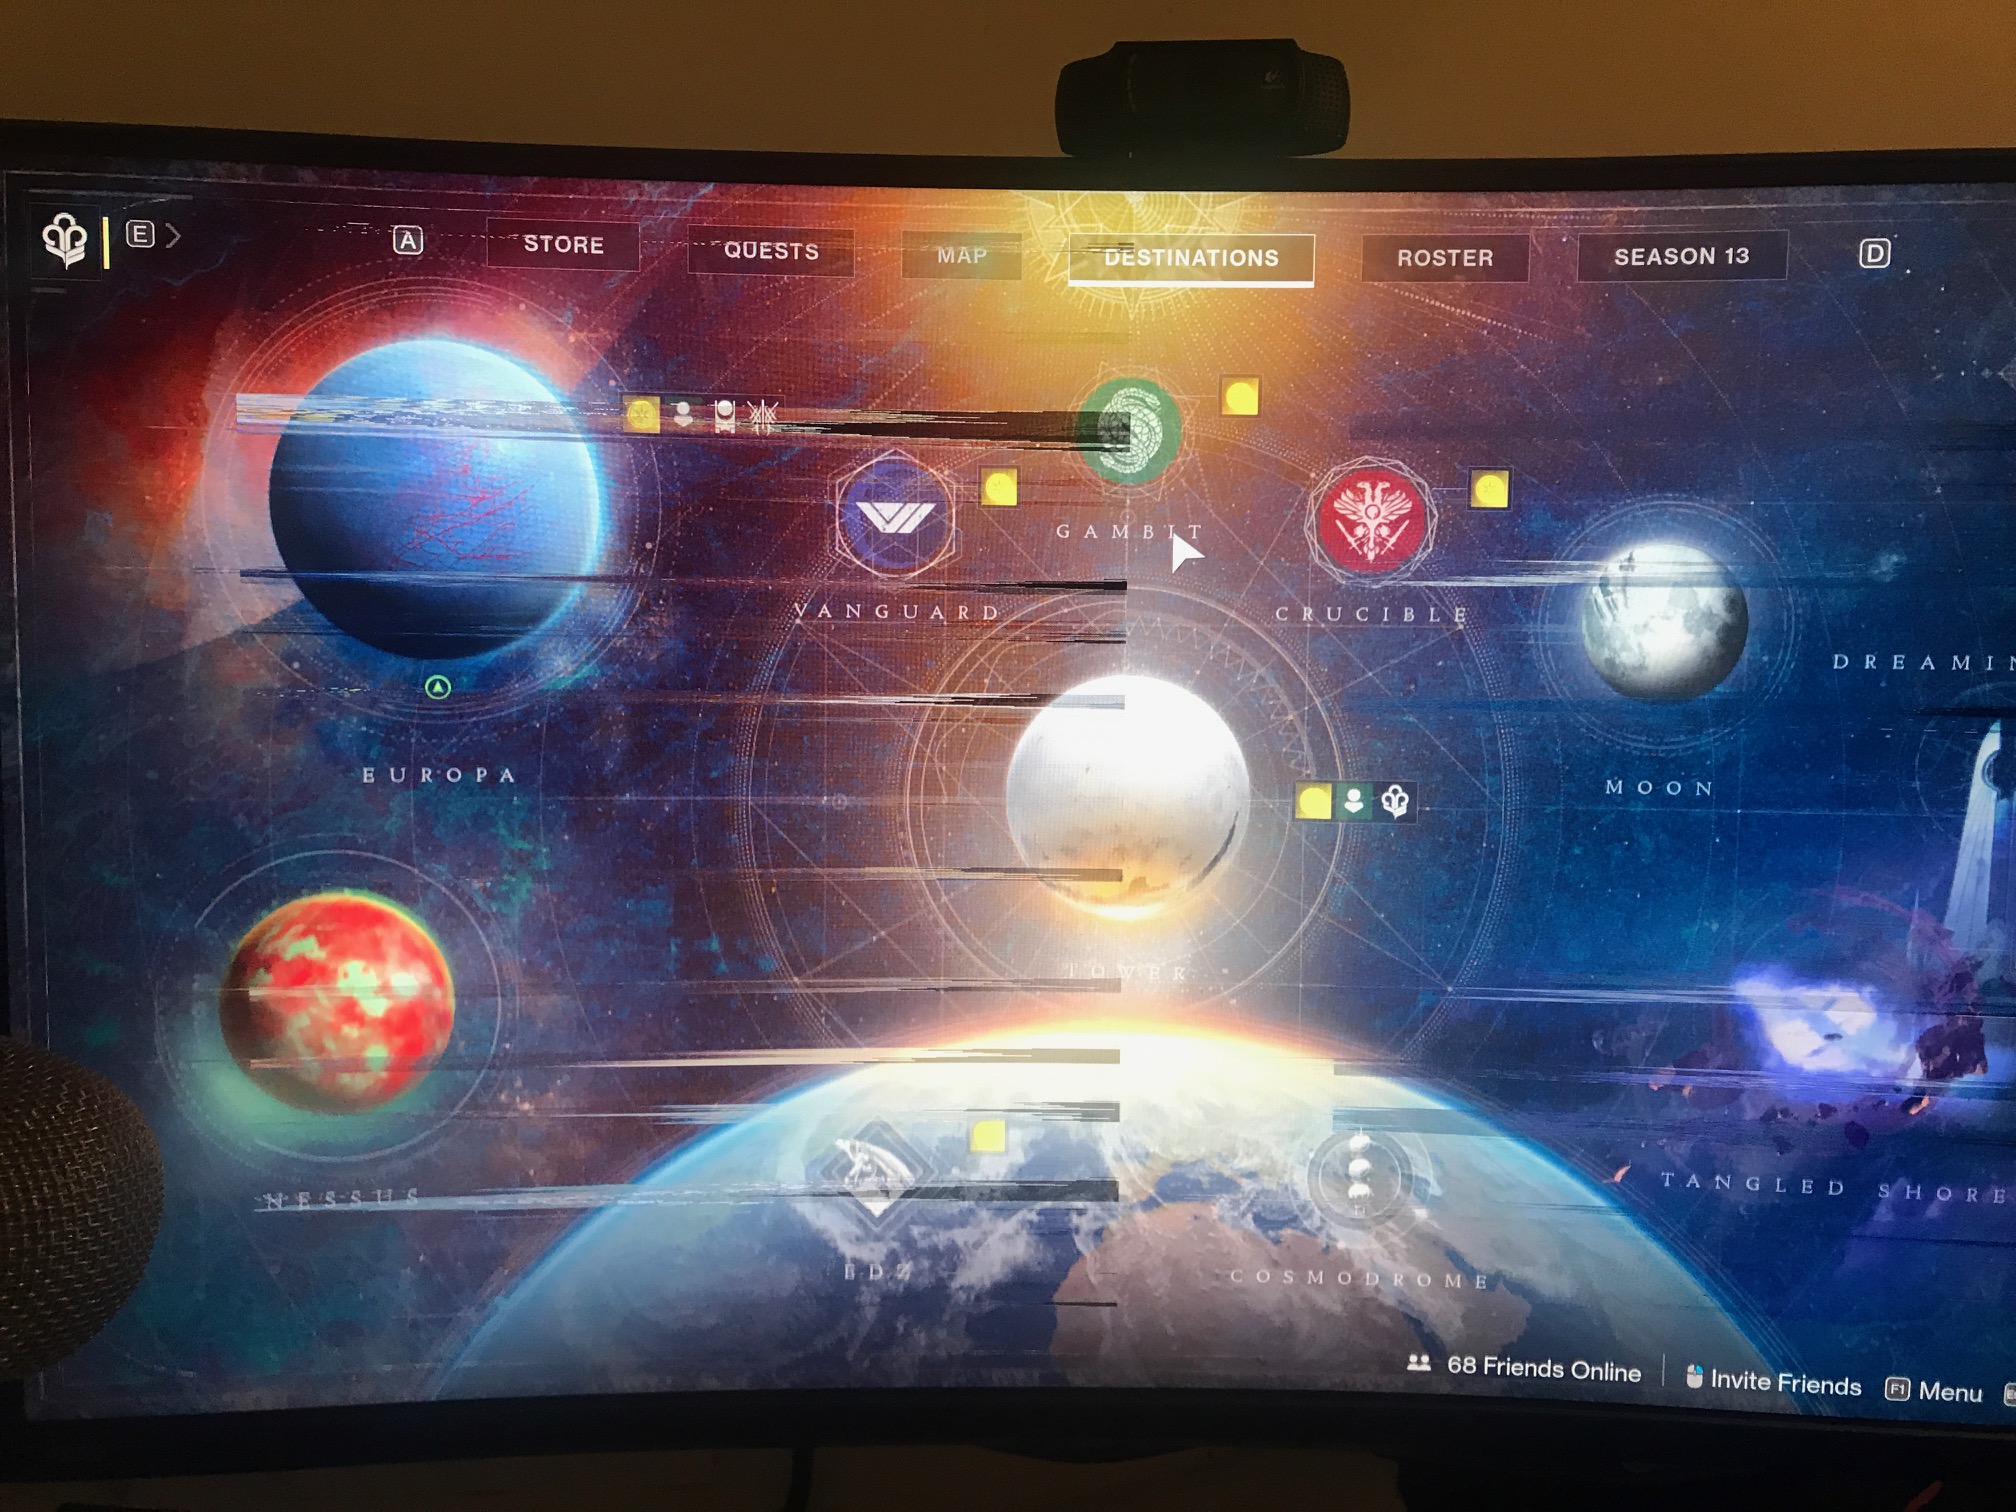 Here is the buggy stuff I think it has something to do with the PIP build into the monitor or something. Only happens with the overdrive set to high on 144hz, it splits the middle of the screen and shows the black lines flicker.